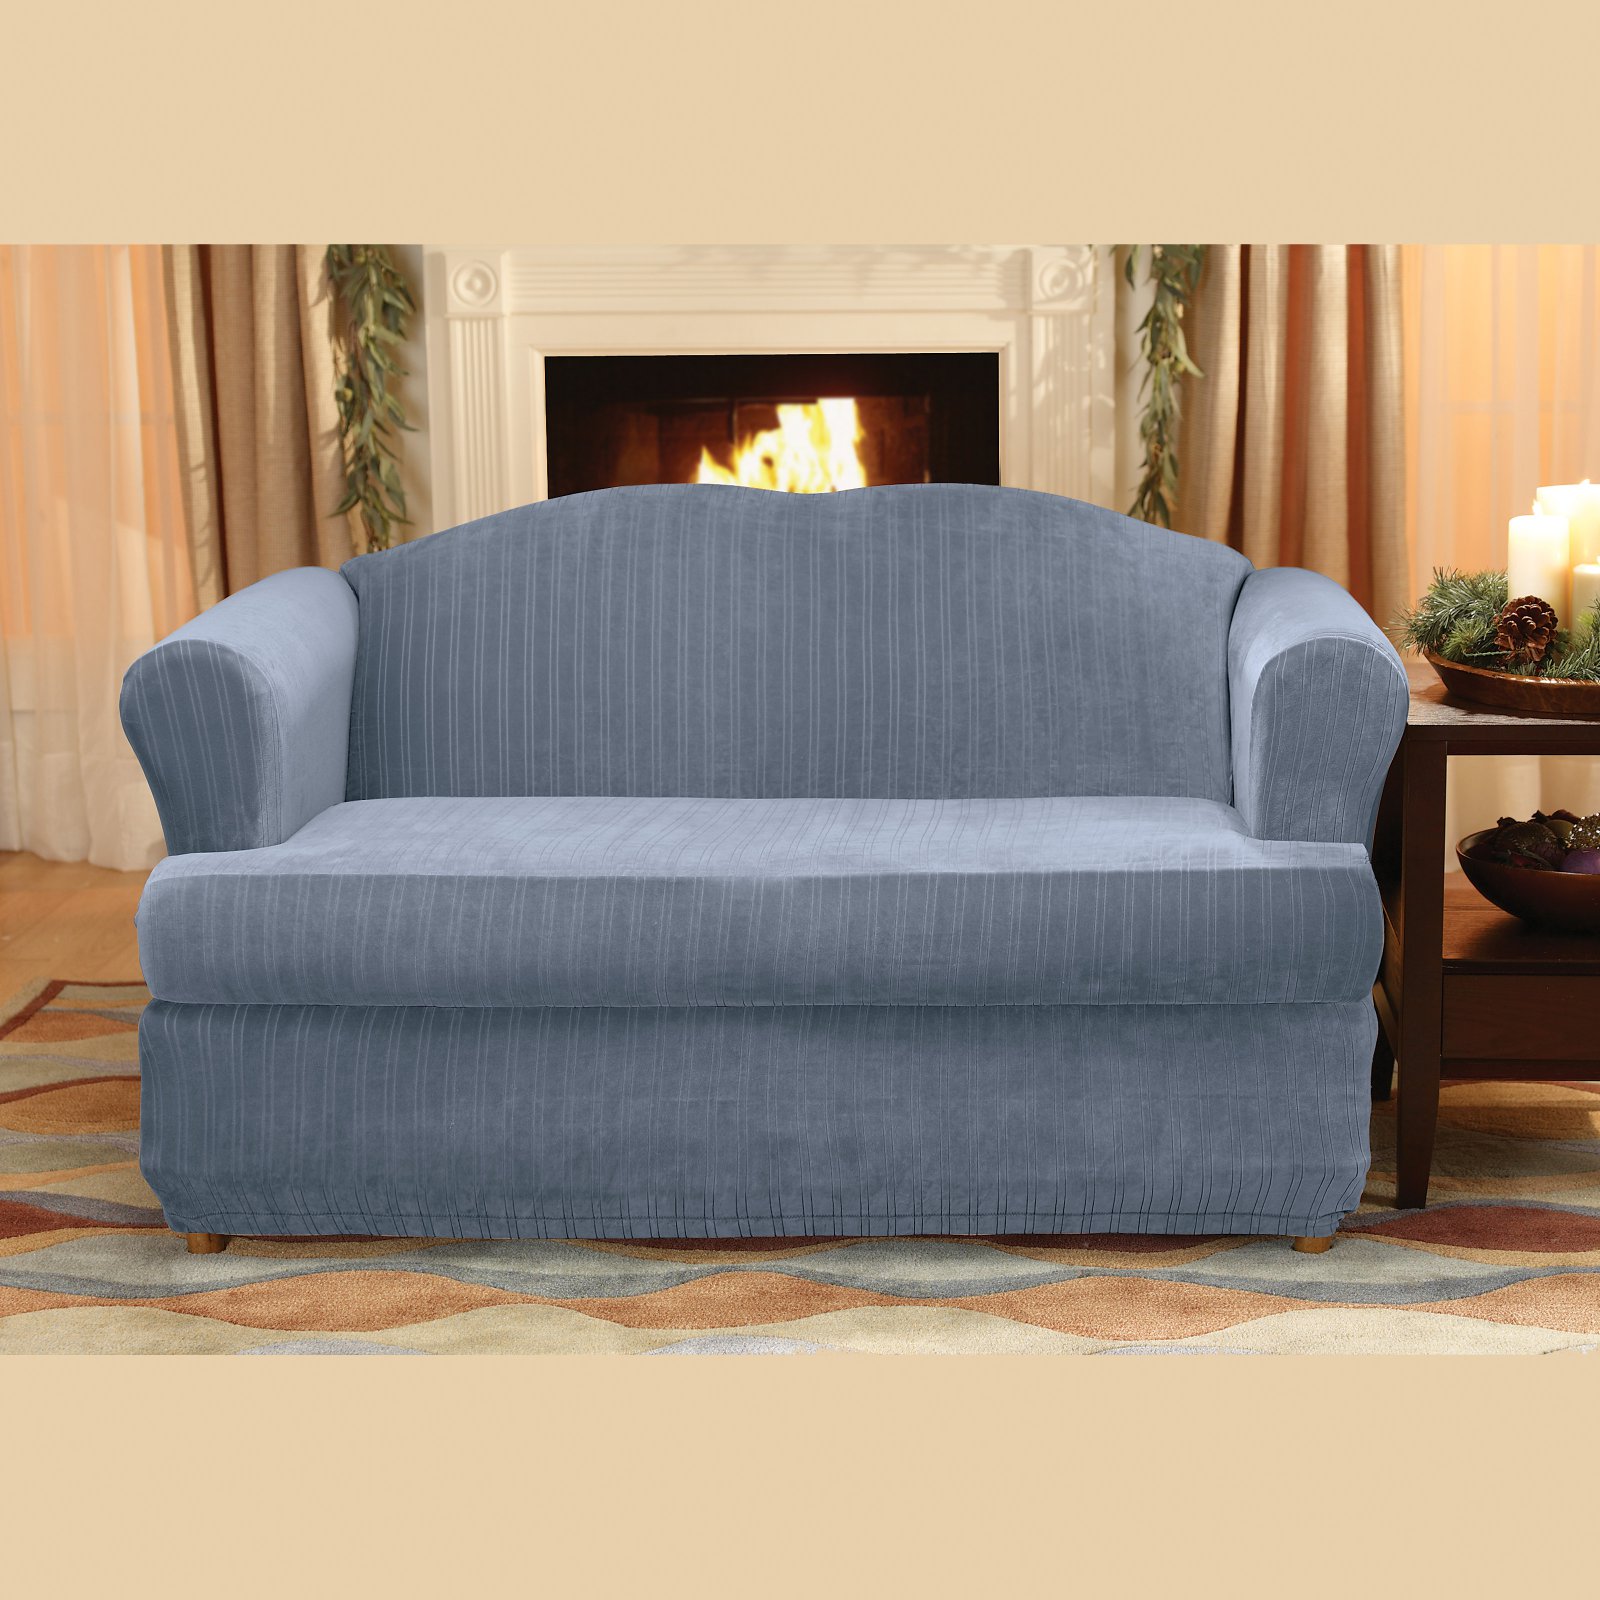 SureFit  Stretch Pinstripe 2 Piece T Cushion Loveseat Slipcover French Blue - image 1 of 2